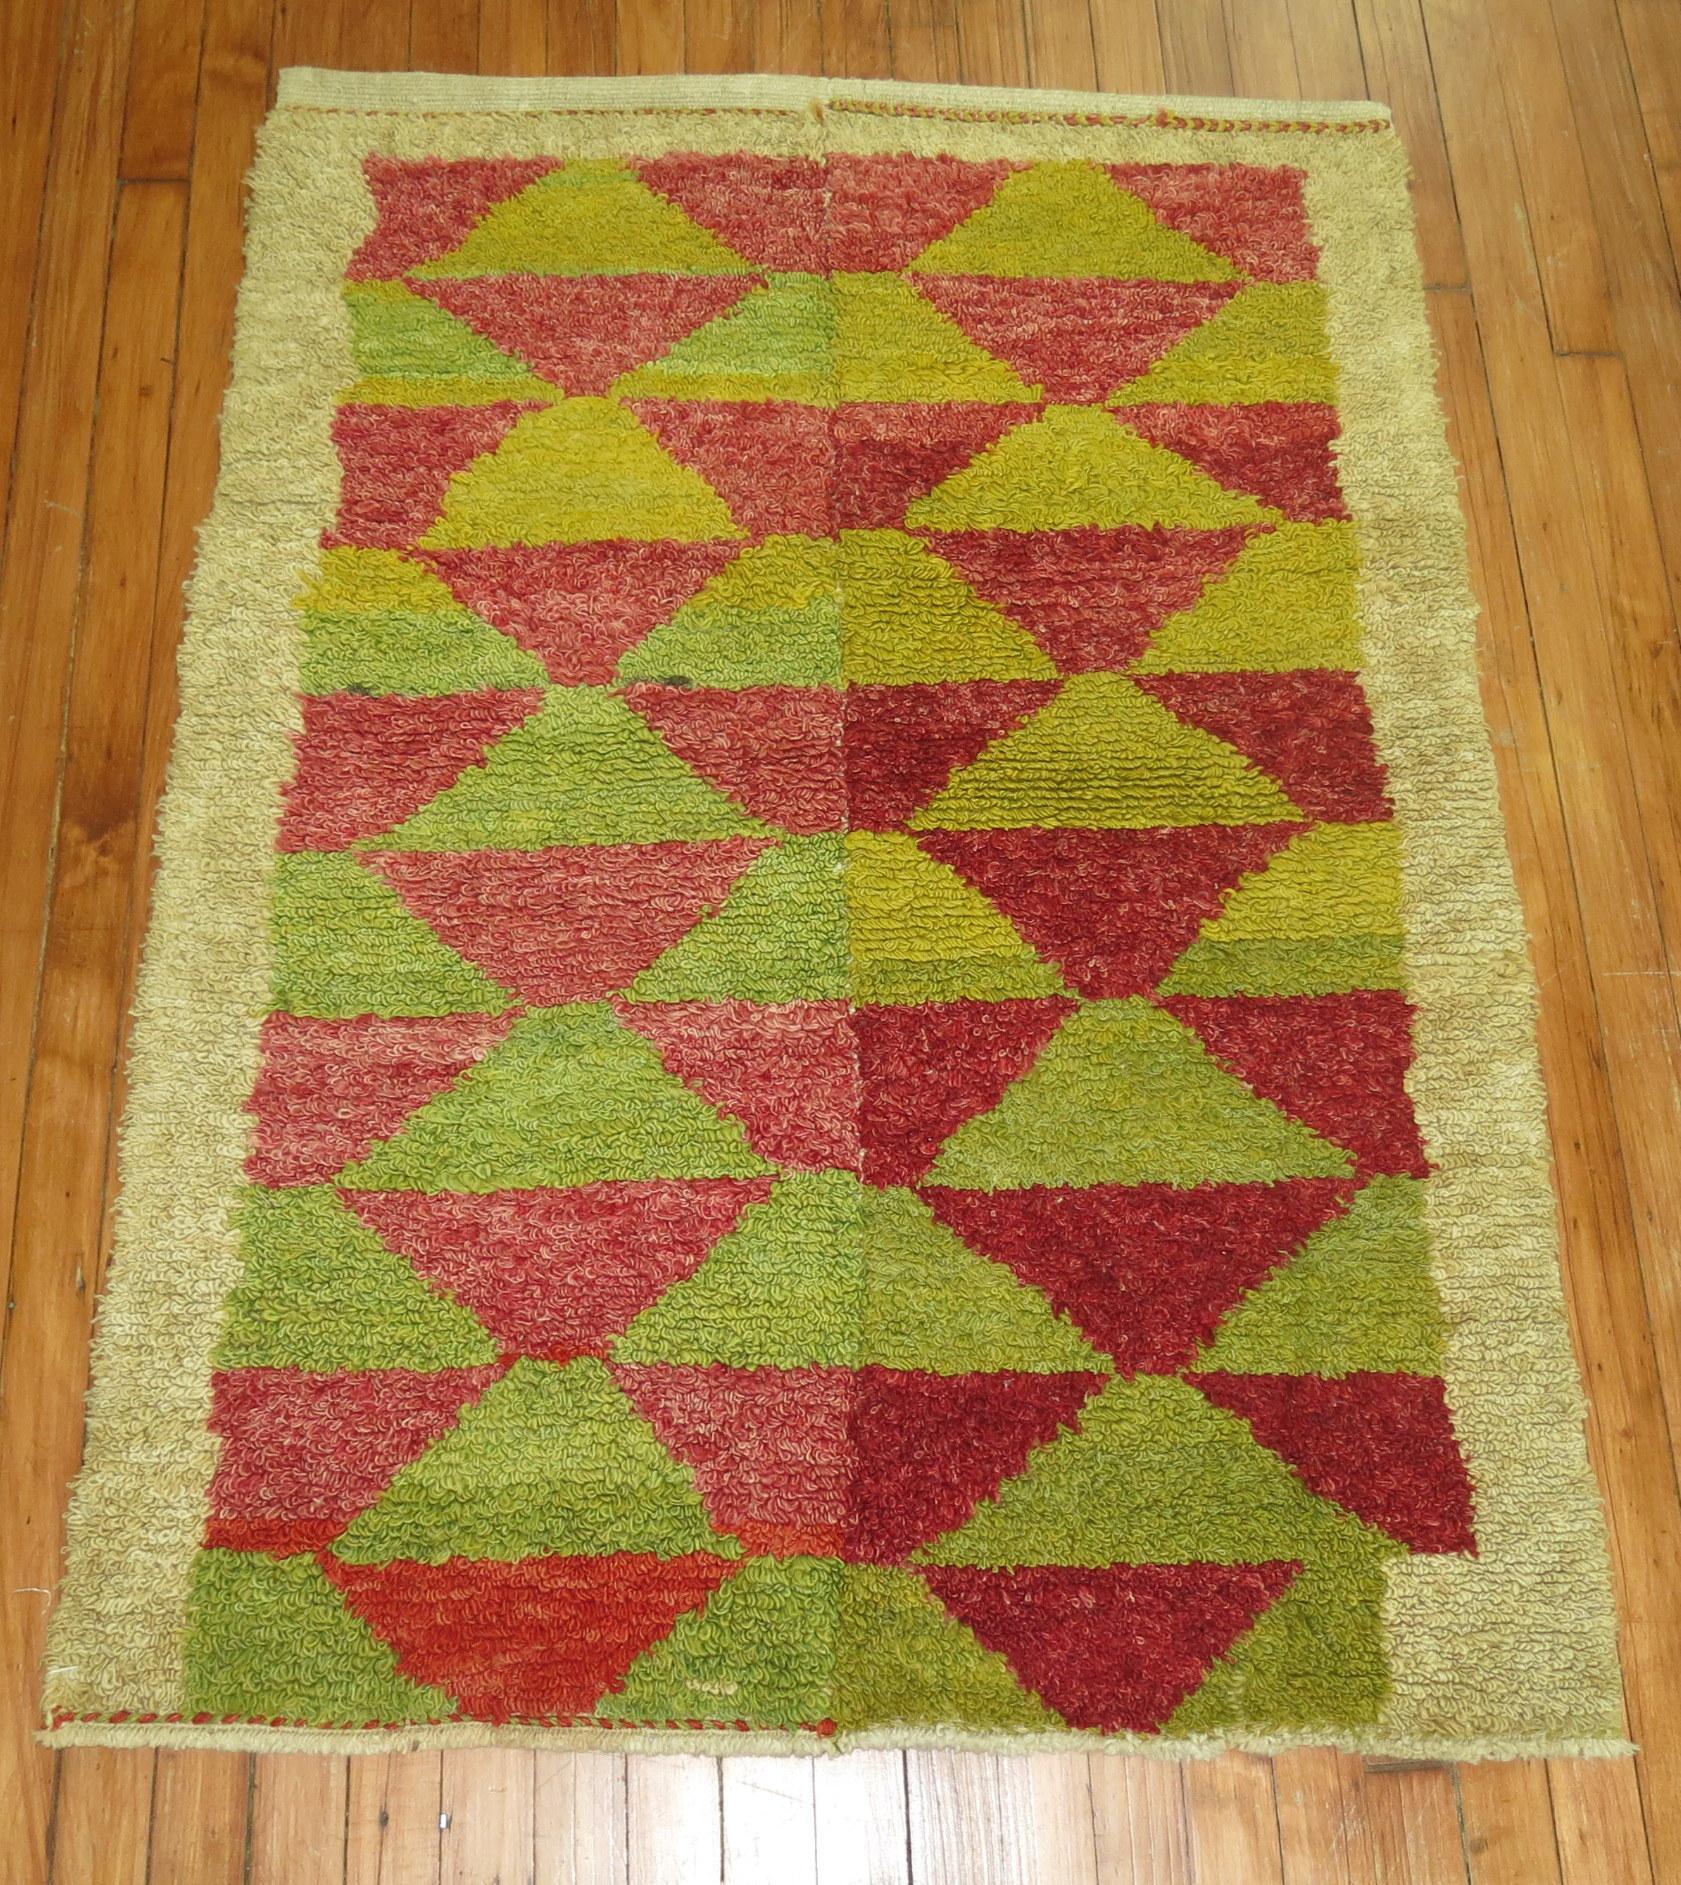 A sweet decorative Turkish shag rug from the mid-20th century.

Measures: 3'2